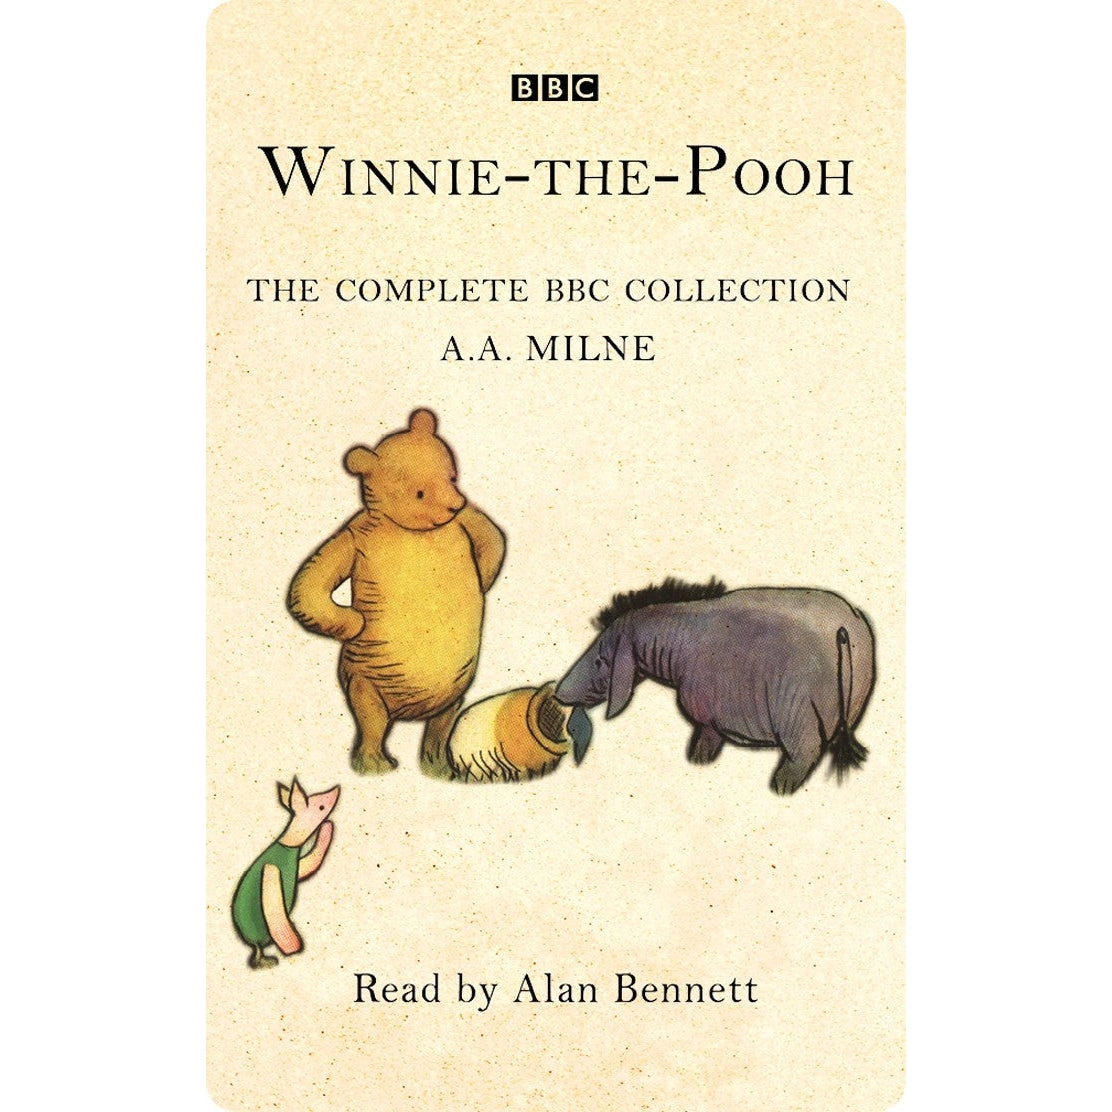 Yoto Card - Winnie-the-Pooh: The Complete BBC Collection - Child Friendly Audio Story Card for the Yoto Player